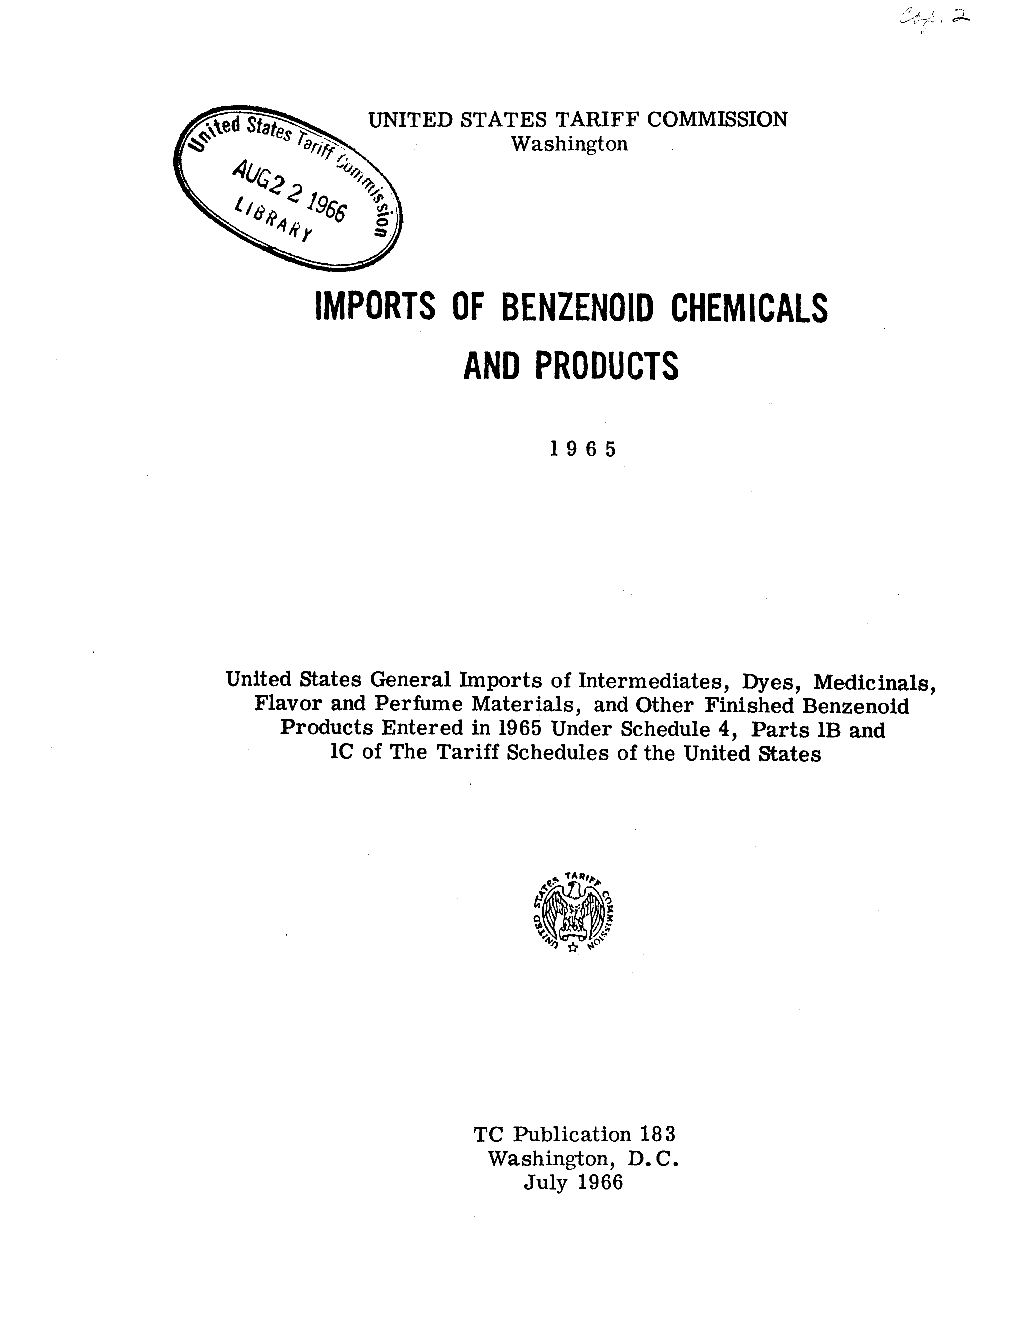 Imports of Benzenoid Chemicals and Products